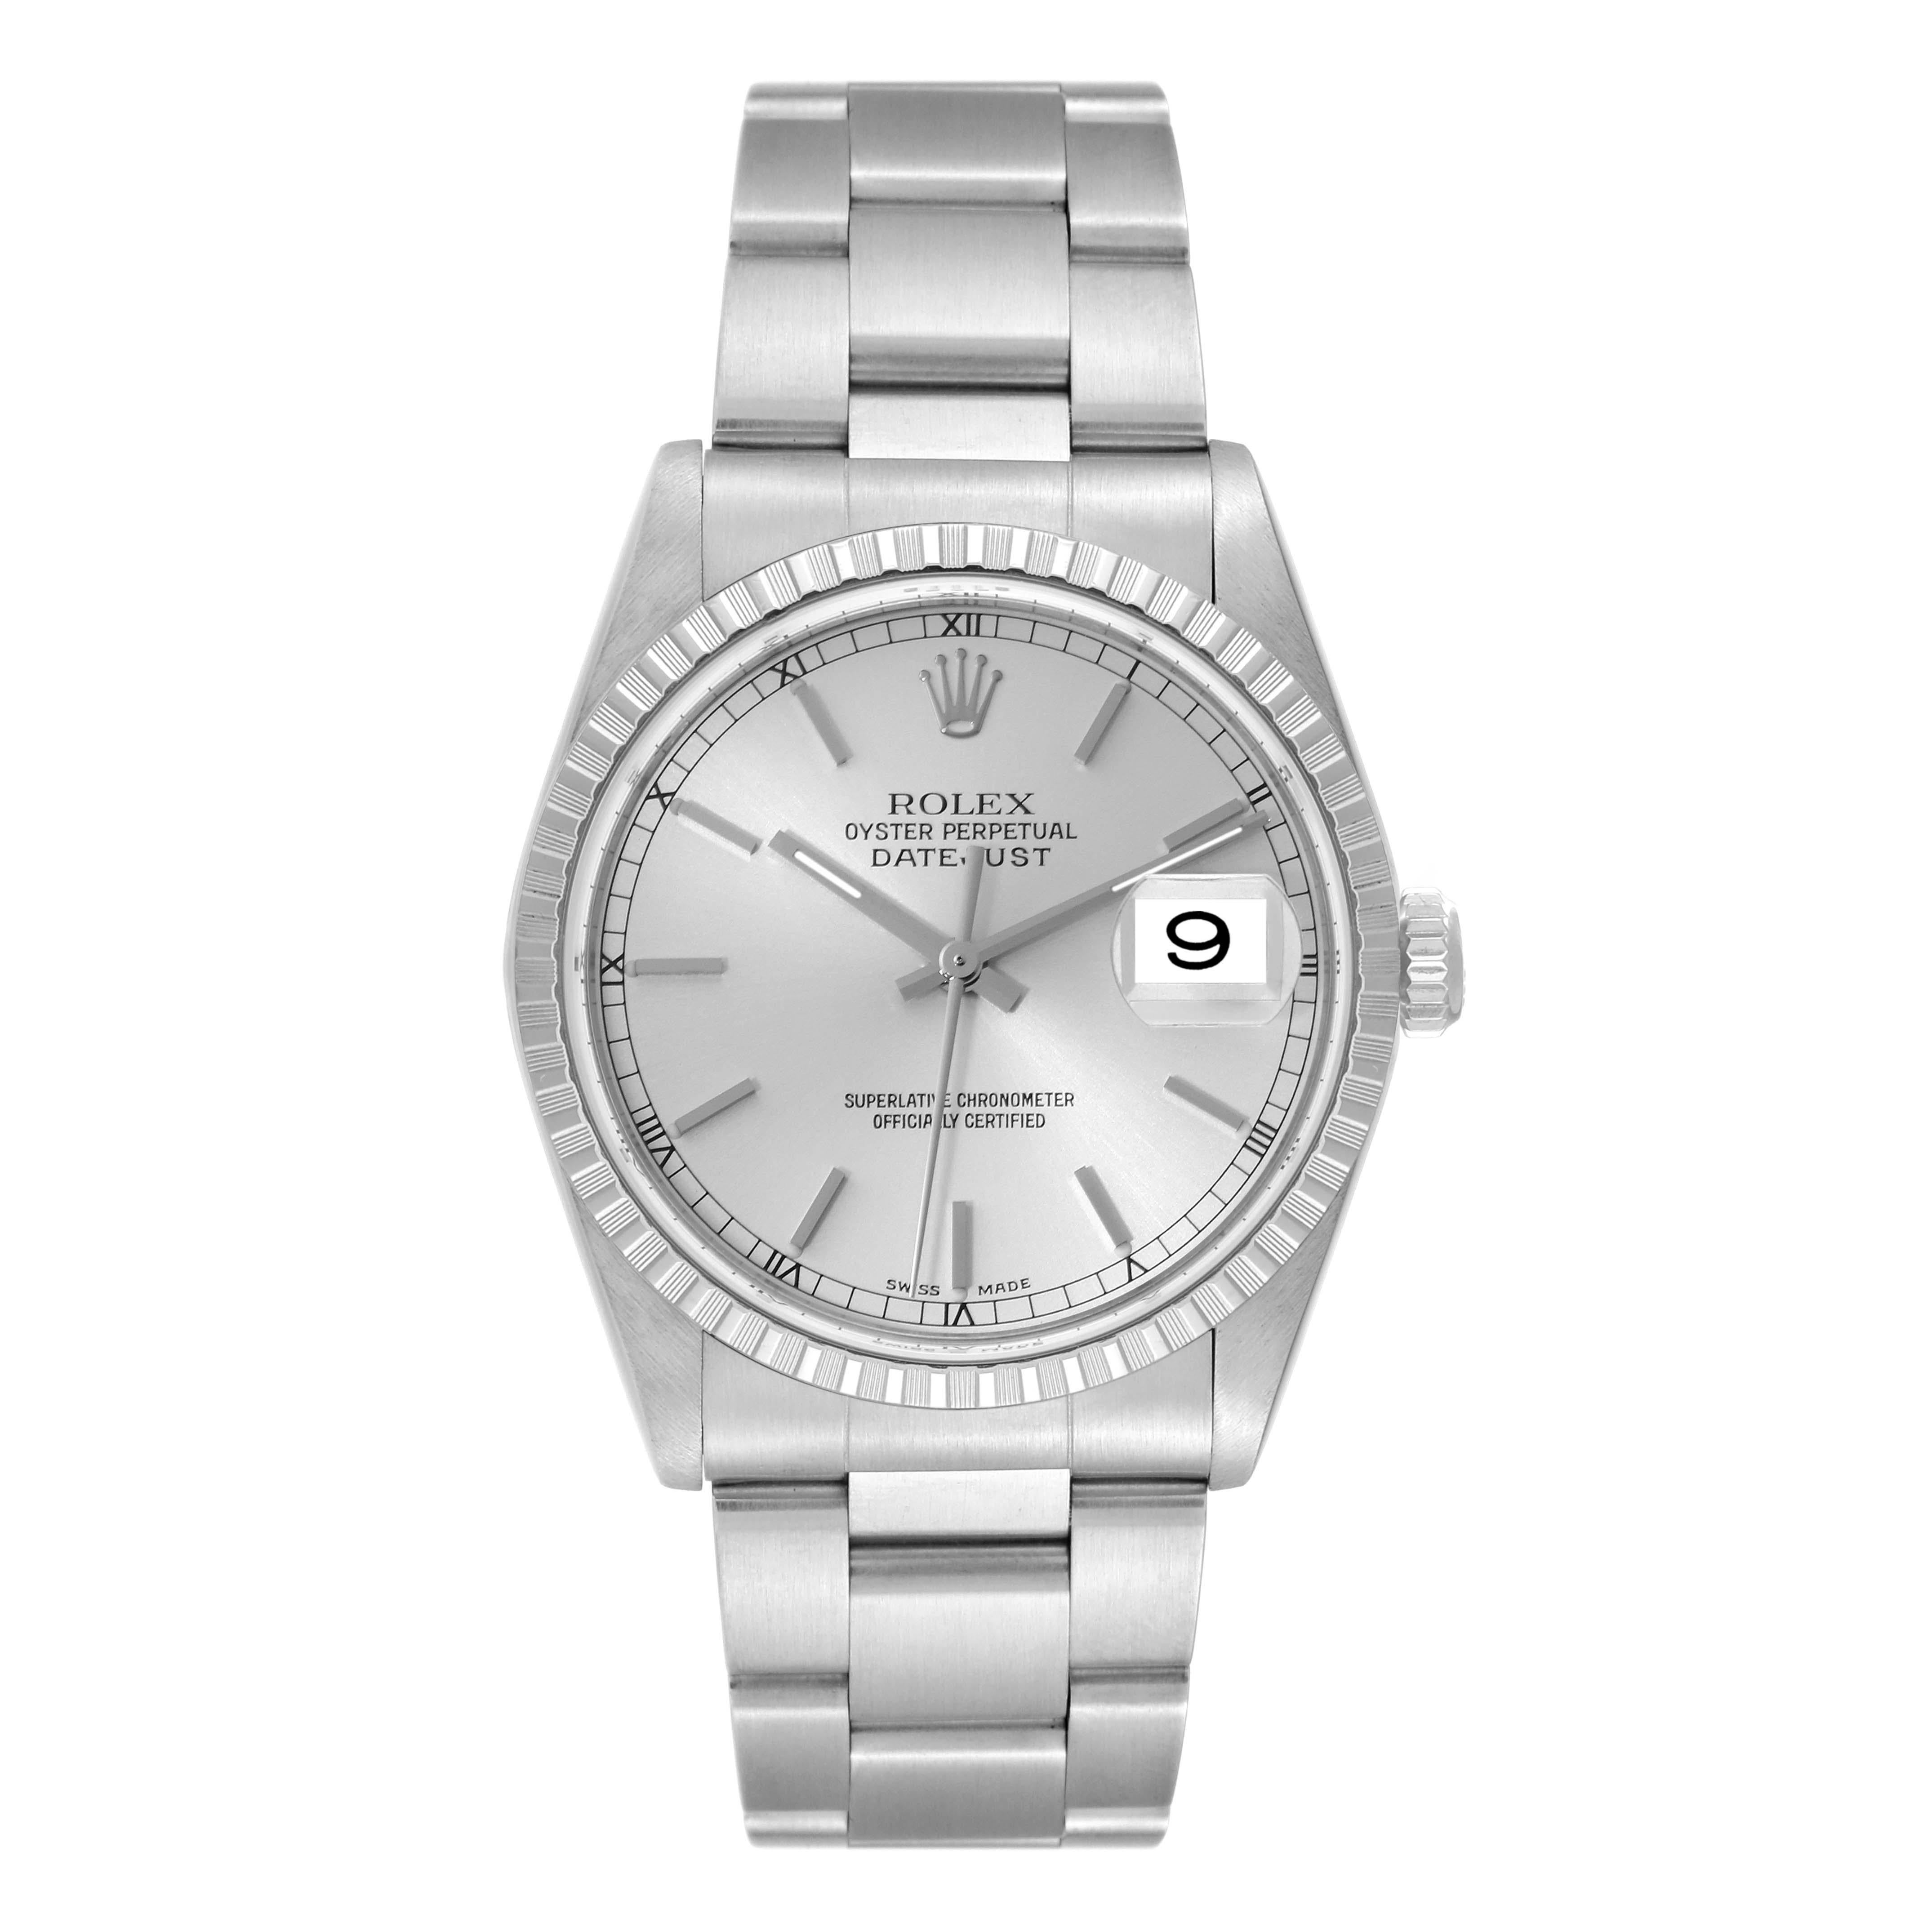 Rolex Datejust Silver Dial Engine Turned Bezel Steel Mens Watch 16220 Box Papers. Officially certified chronometer automatic self-winding movement. Stainless steel oyster case 36.0 mm in diameter. Rolex logo on the crown. Stainless steel engine